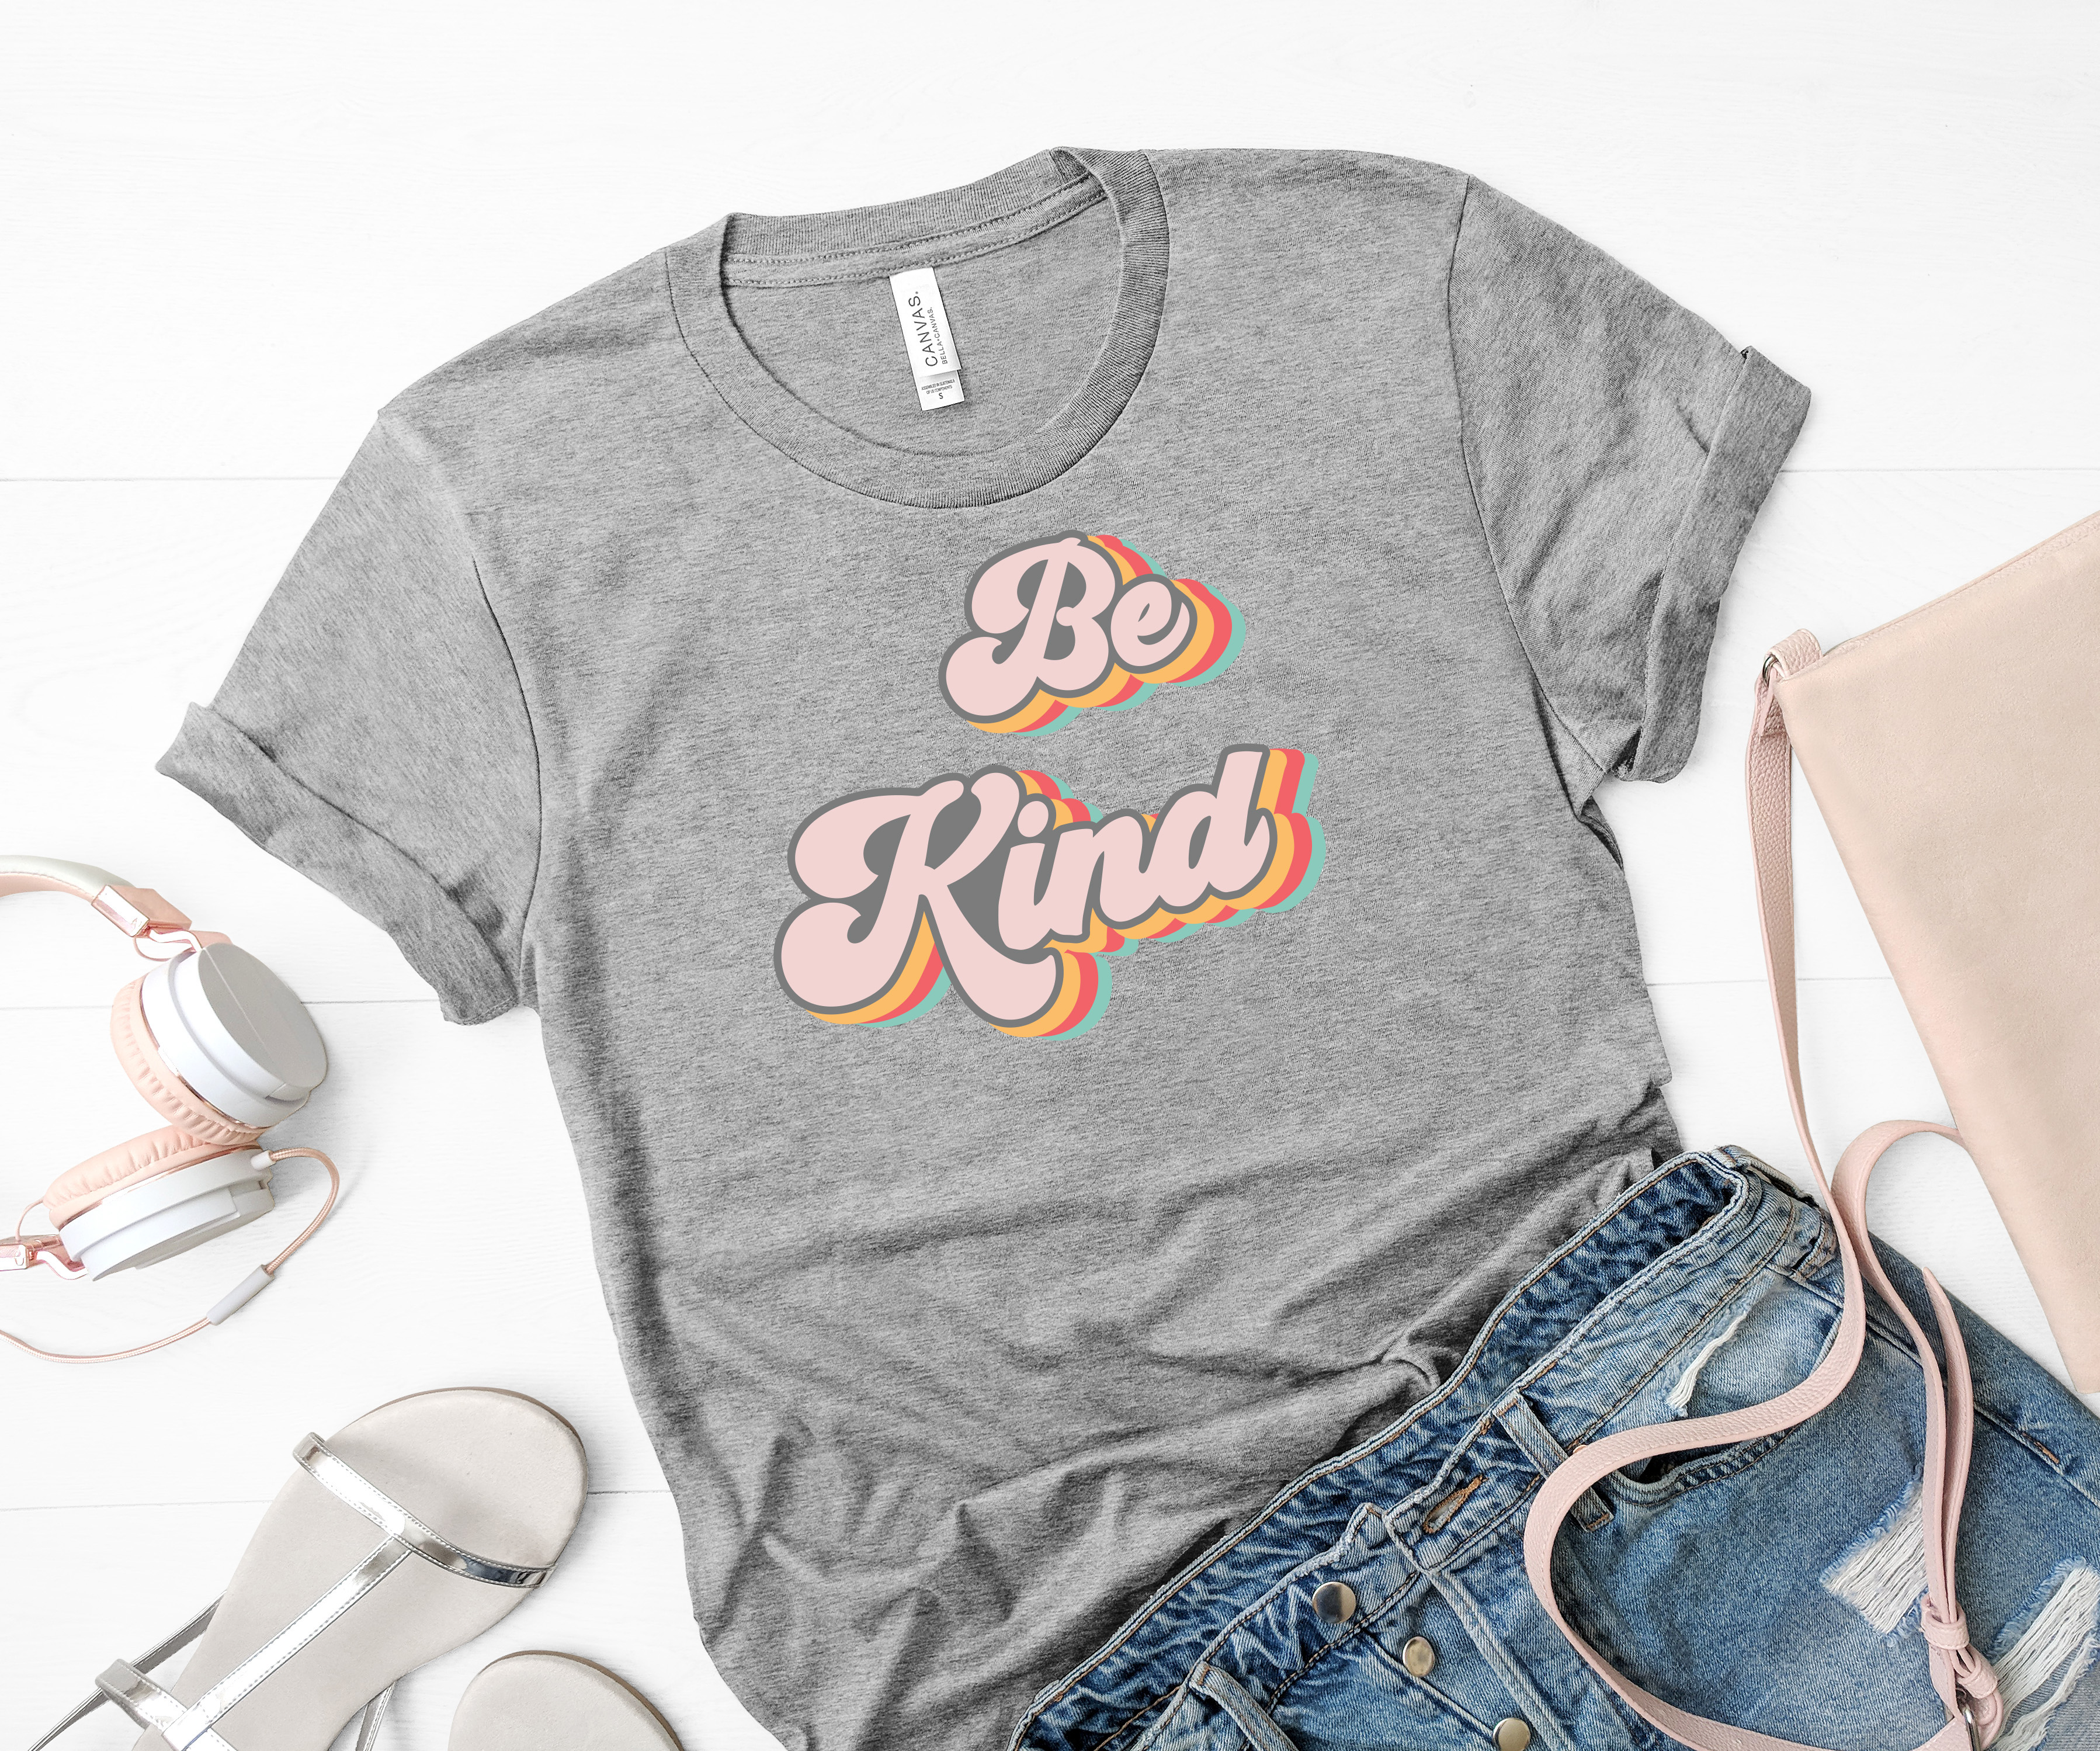 graphic tee shirt with retro 70s style lettering